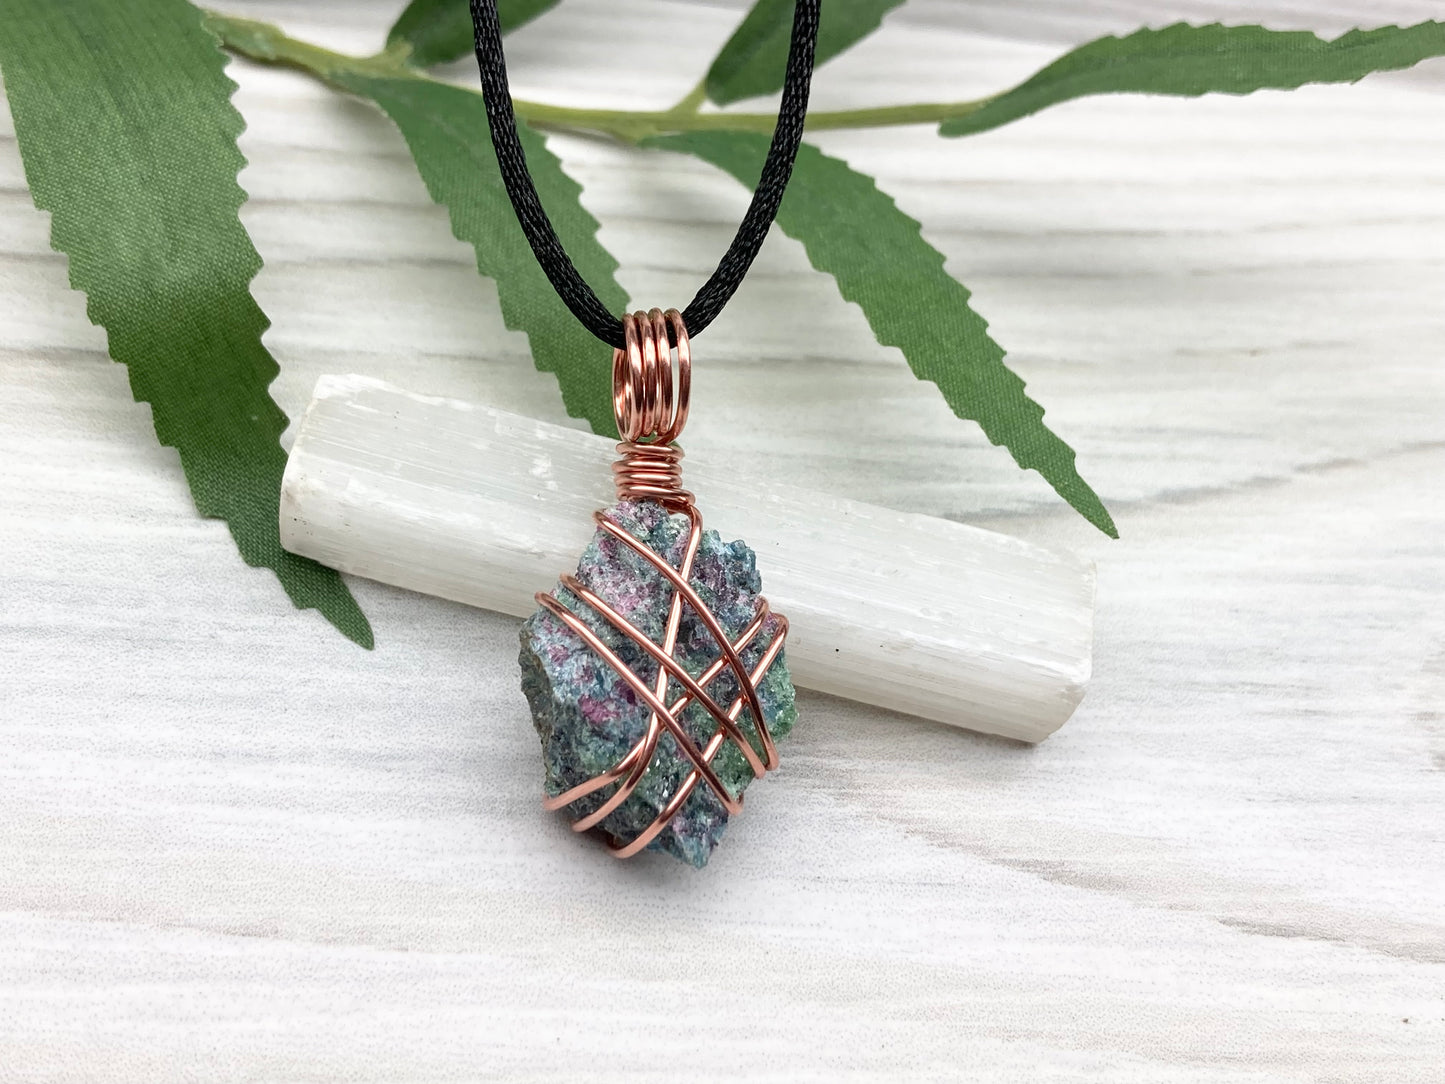 Raw Ruby Zoisite Necklace. This Ruby Zoisite Crystal Is Hand Wrapped With Pure Copper Wire For A Pendant. This Stone is Blue, Red And Green Colored. Comes On A Black Chain. Spiritual New Age Style Jewelry.